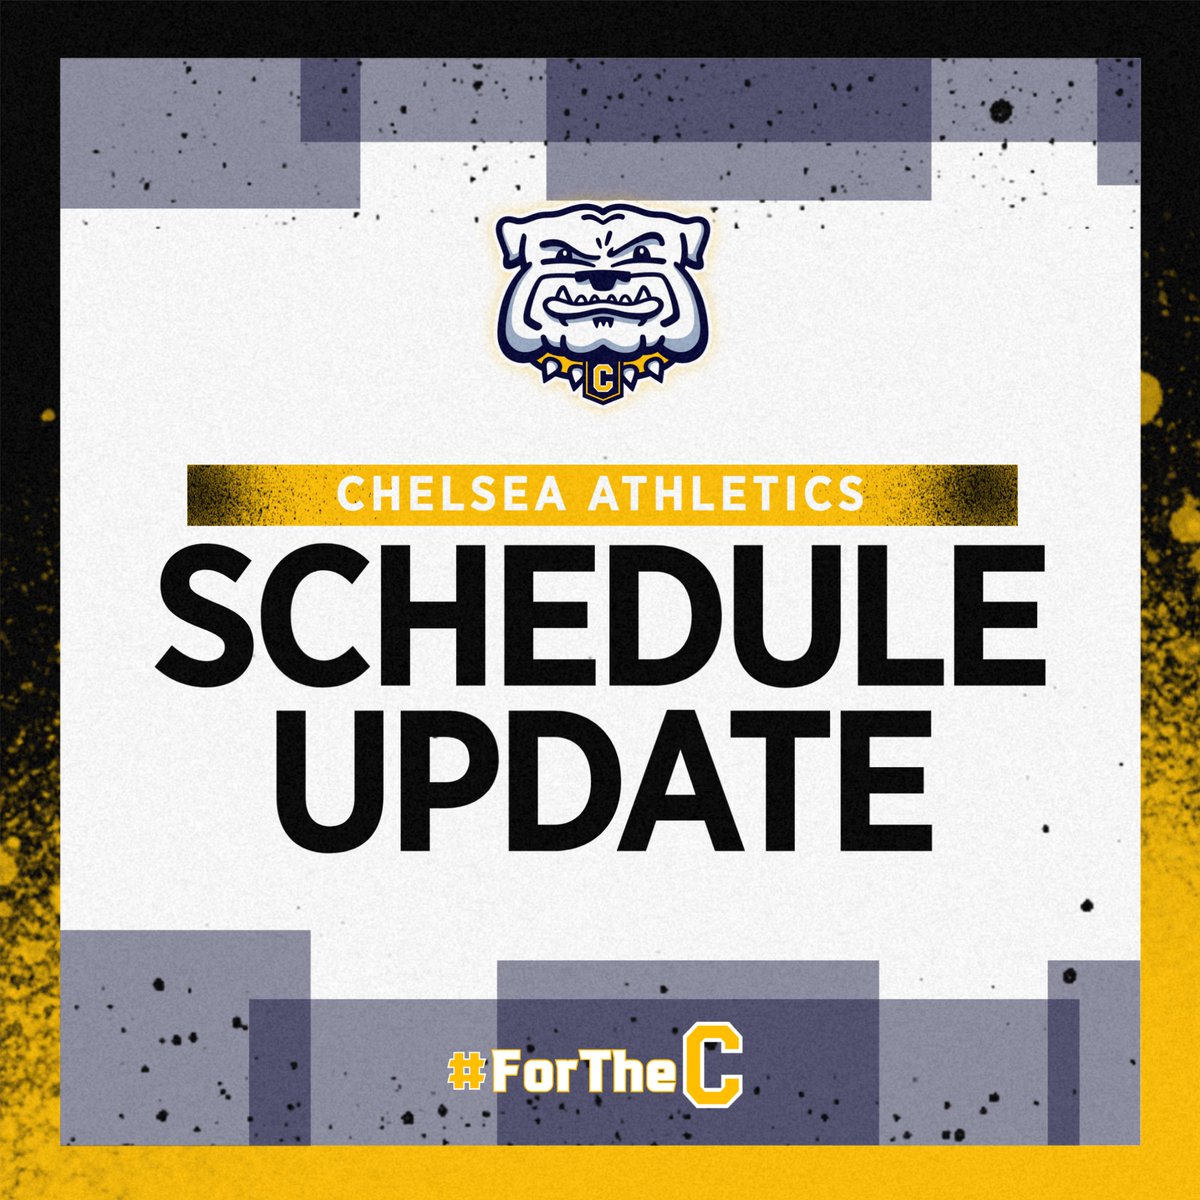 Schedule Update 2 for Monday, April 22nd: V Baseball at Ypsilanti is PPD and the teams will now play a DH on Wednesday at 4:00 PM at Chelsea. Wednesday's single game originally scheduled at Chelsea will be made up on a date/location TBD.